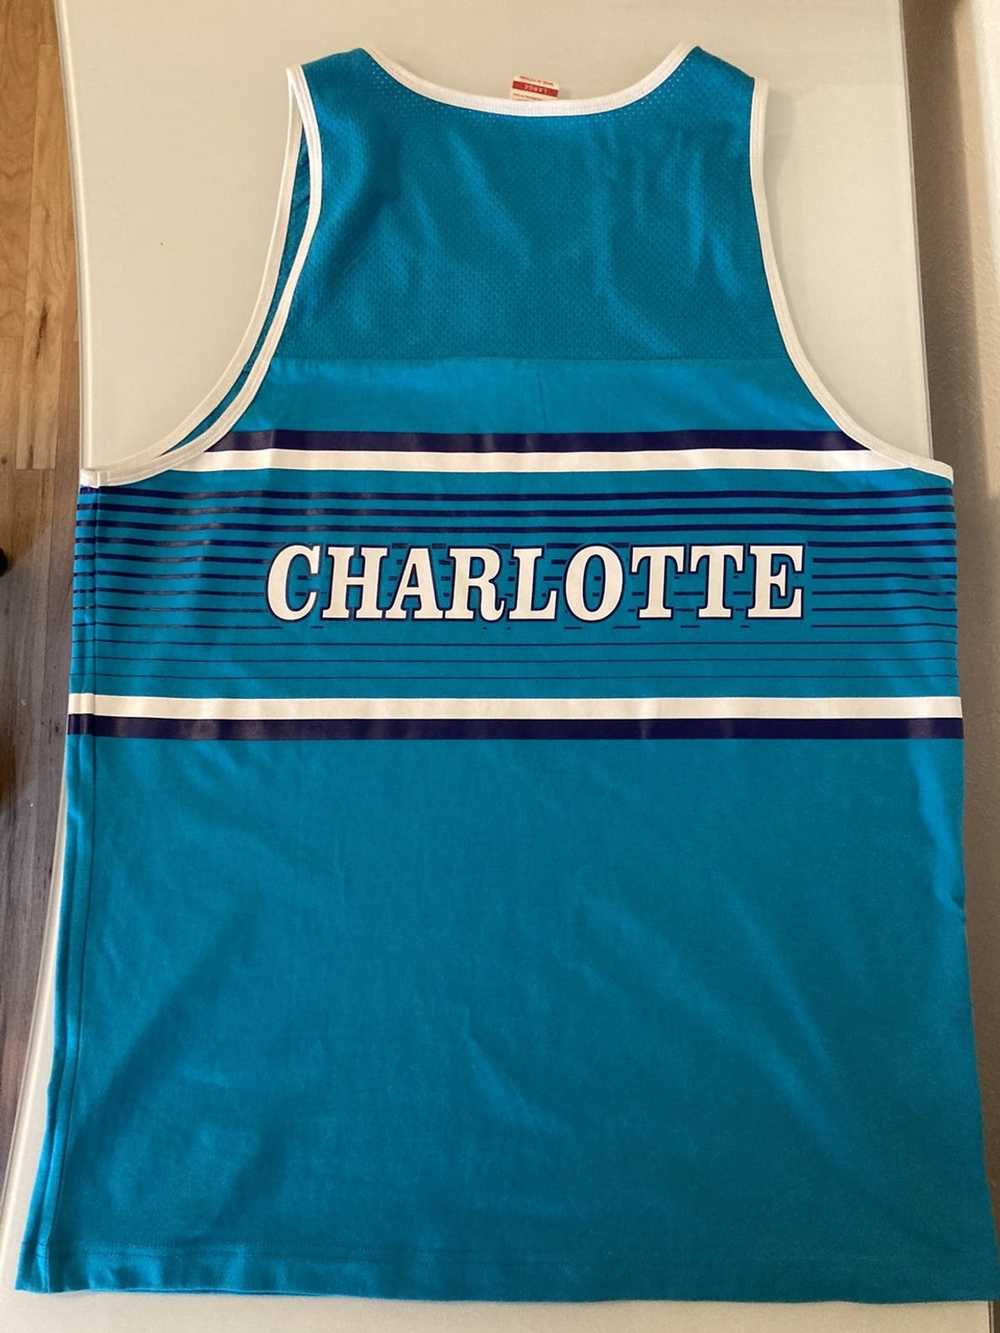 NBA Charlotte Hornets Basketball Blank Throwback 2017-18 Game Jersey Size  44+4